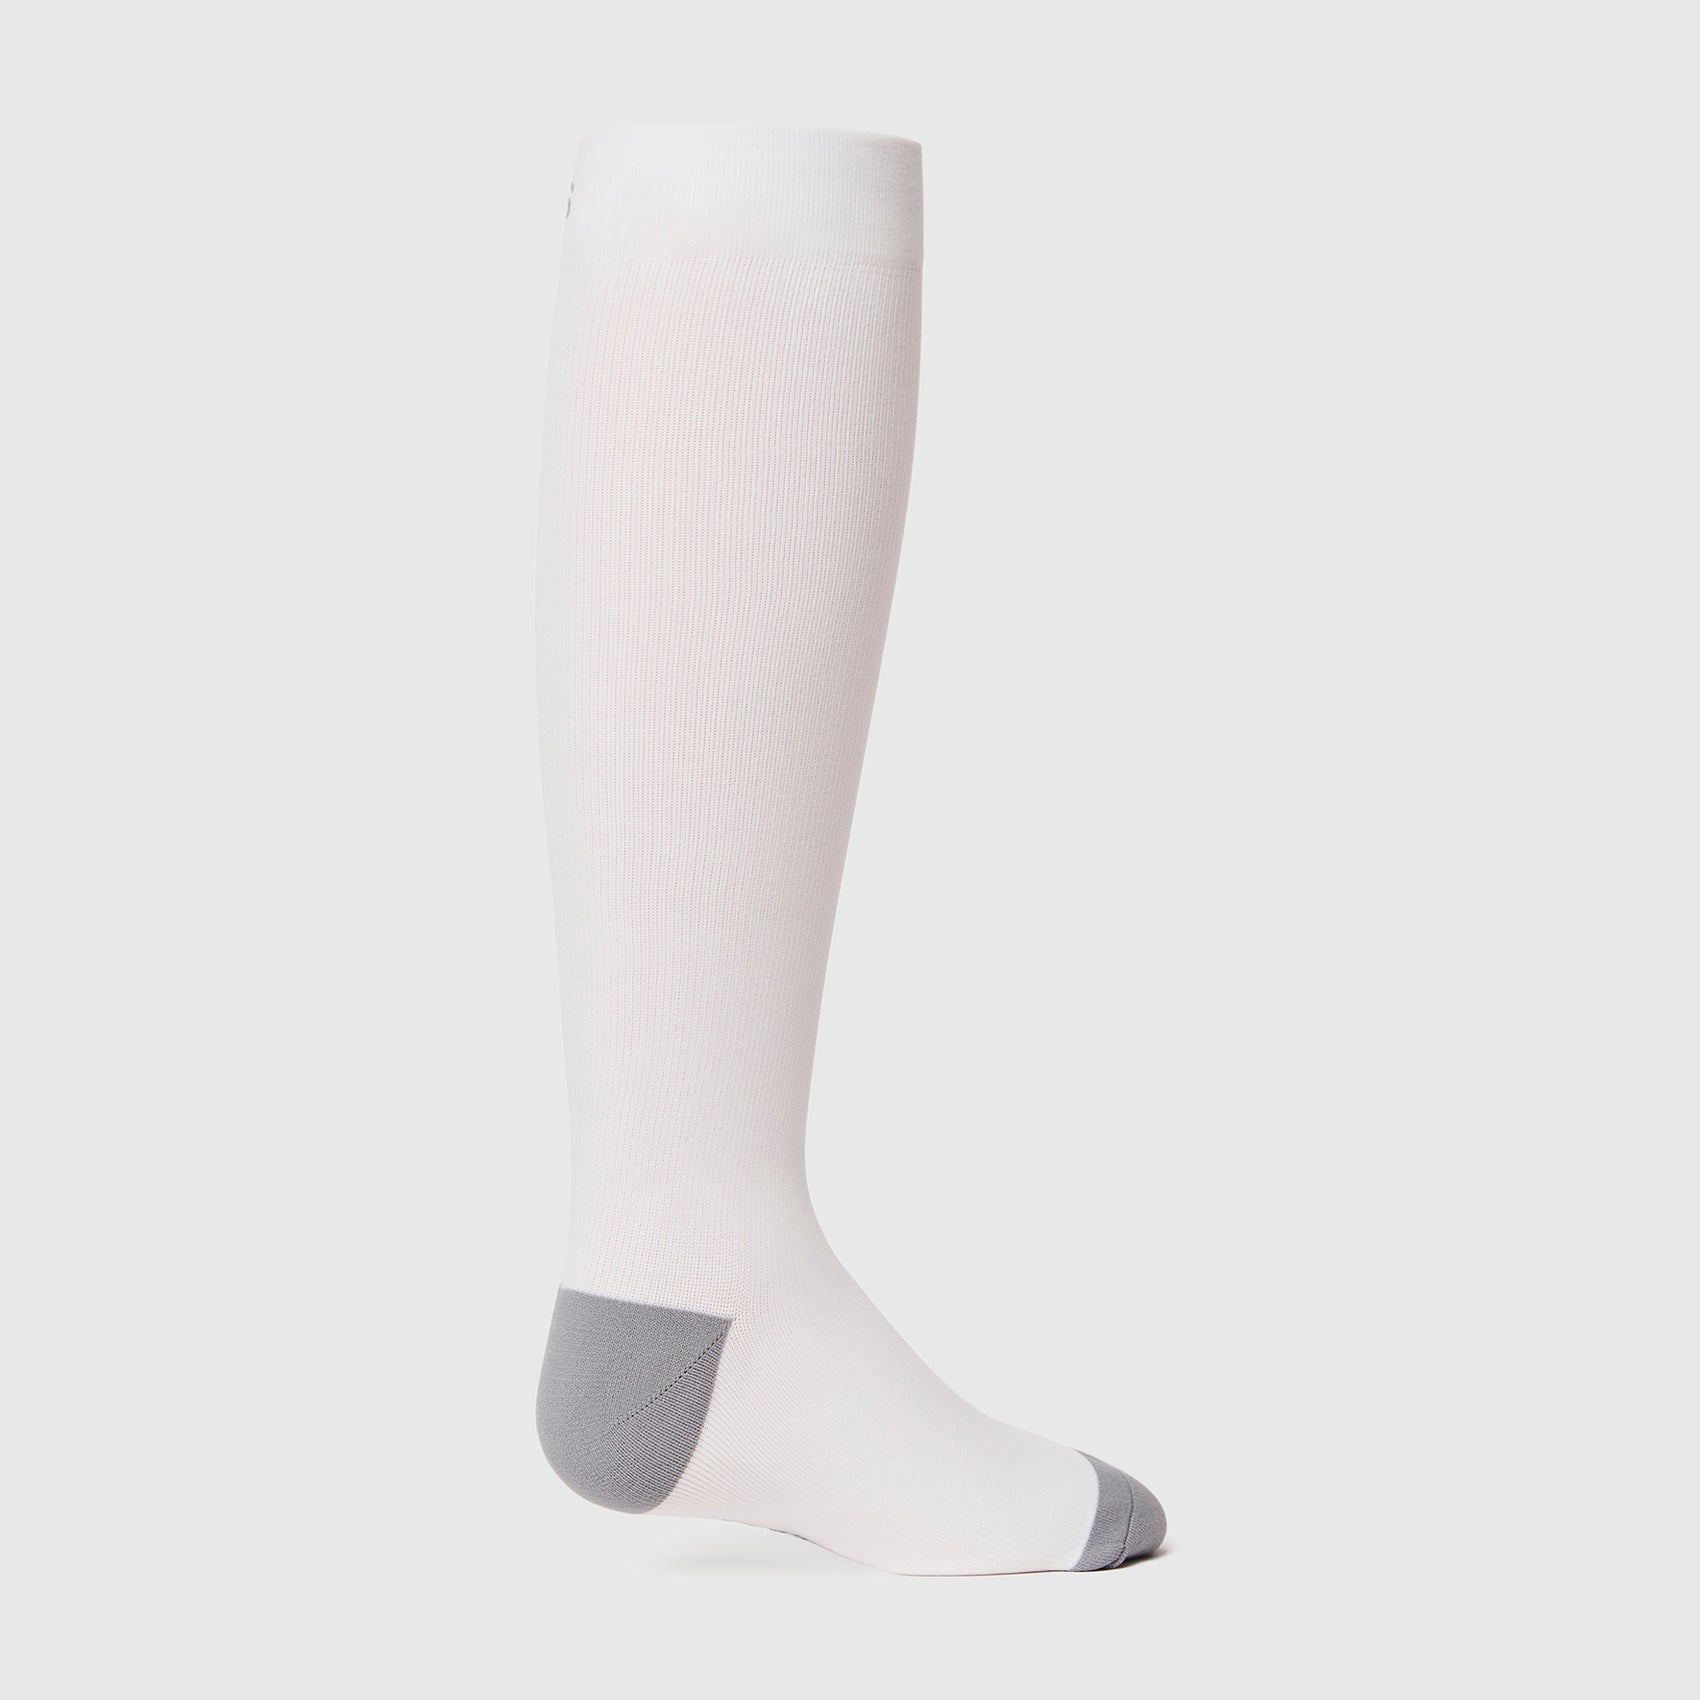 https://cdn.shopify.com/s/files/1/0139/8942/products/Q1_2022_12_WHITE_COMPRESSIONSOCKS_W_GHOST_16724.jpg?v=1674076293